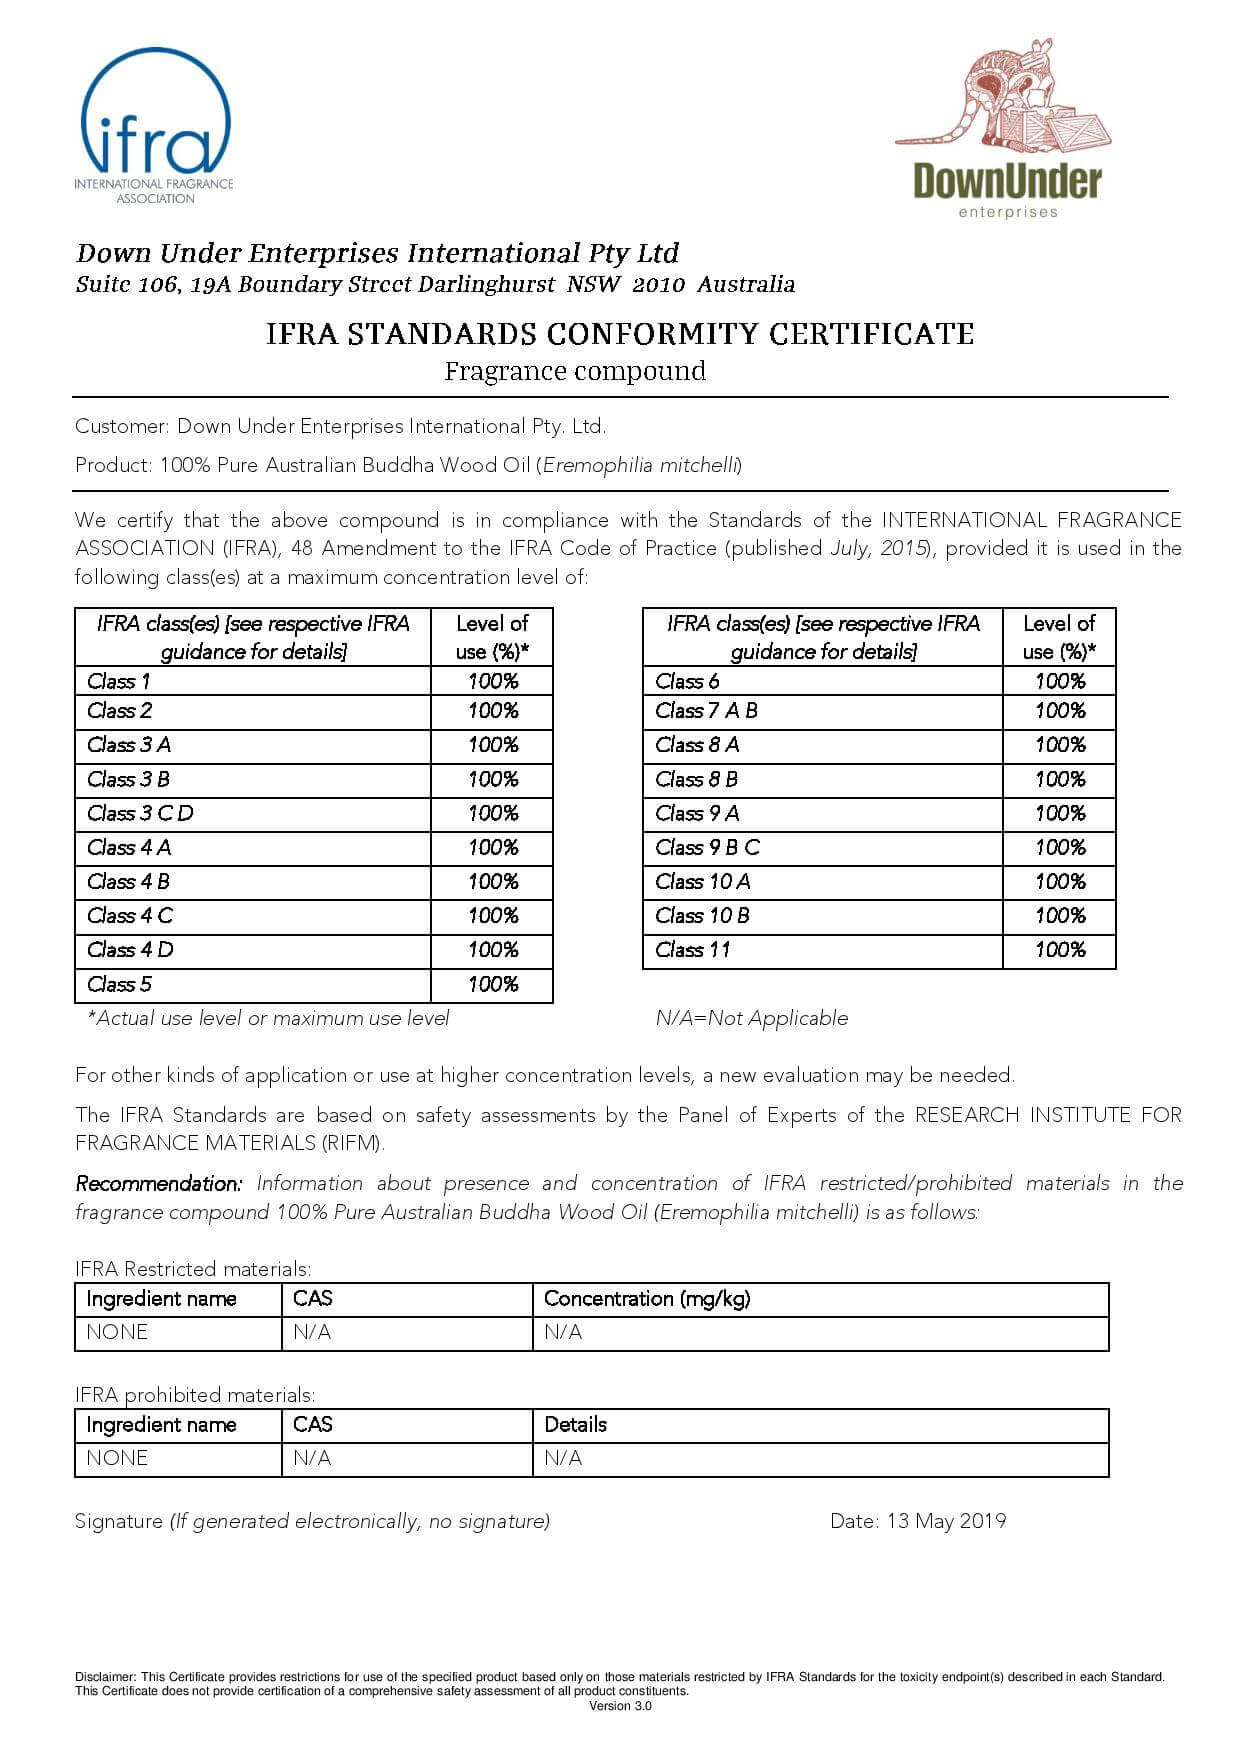 IFRA Certificate